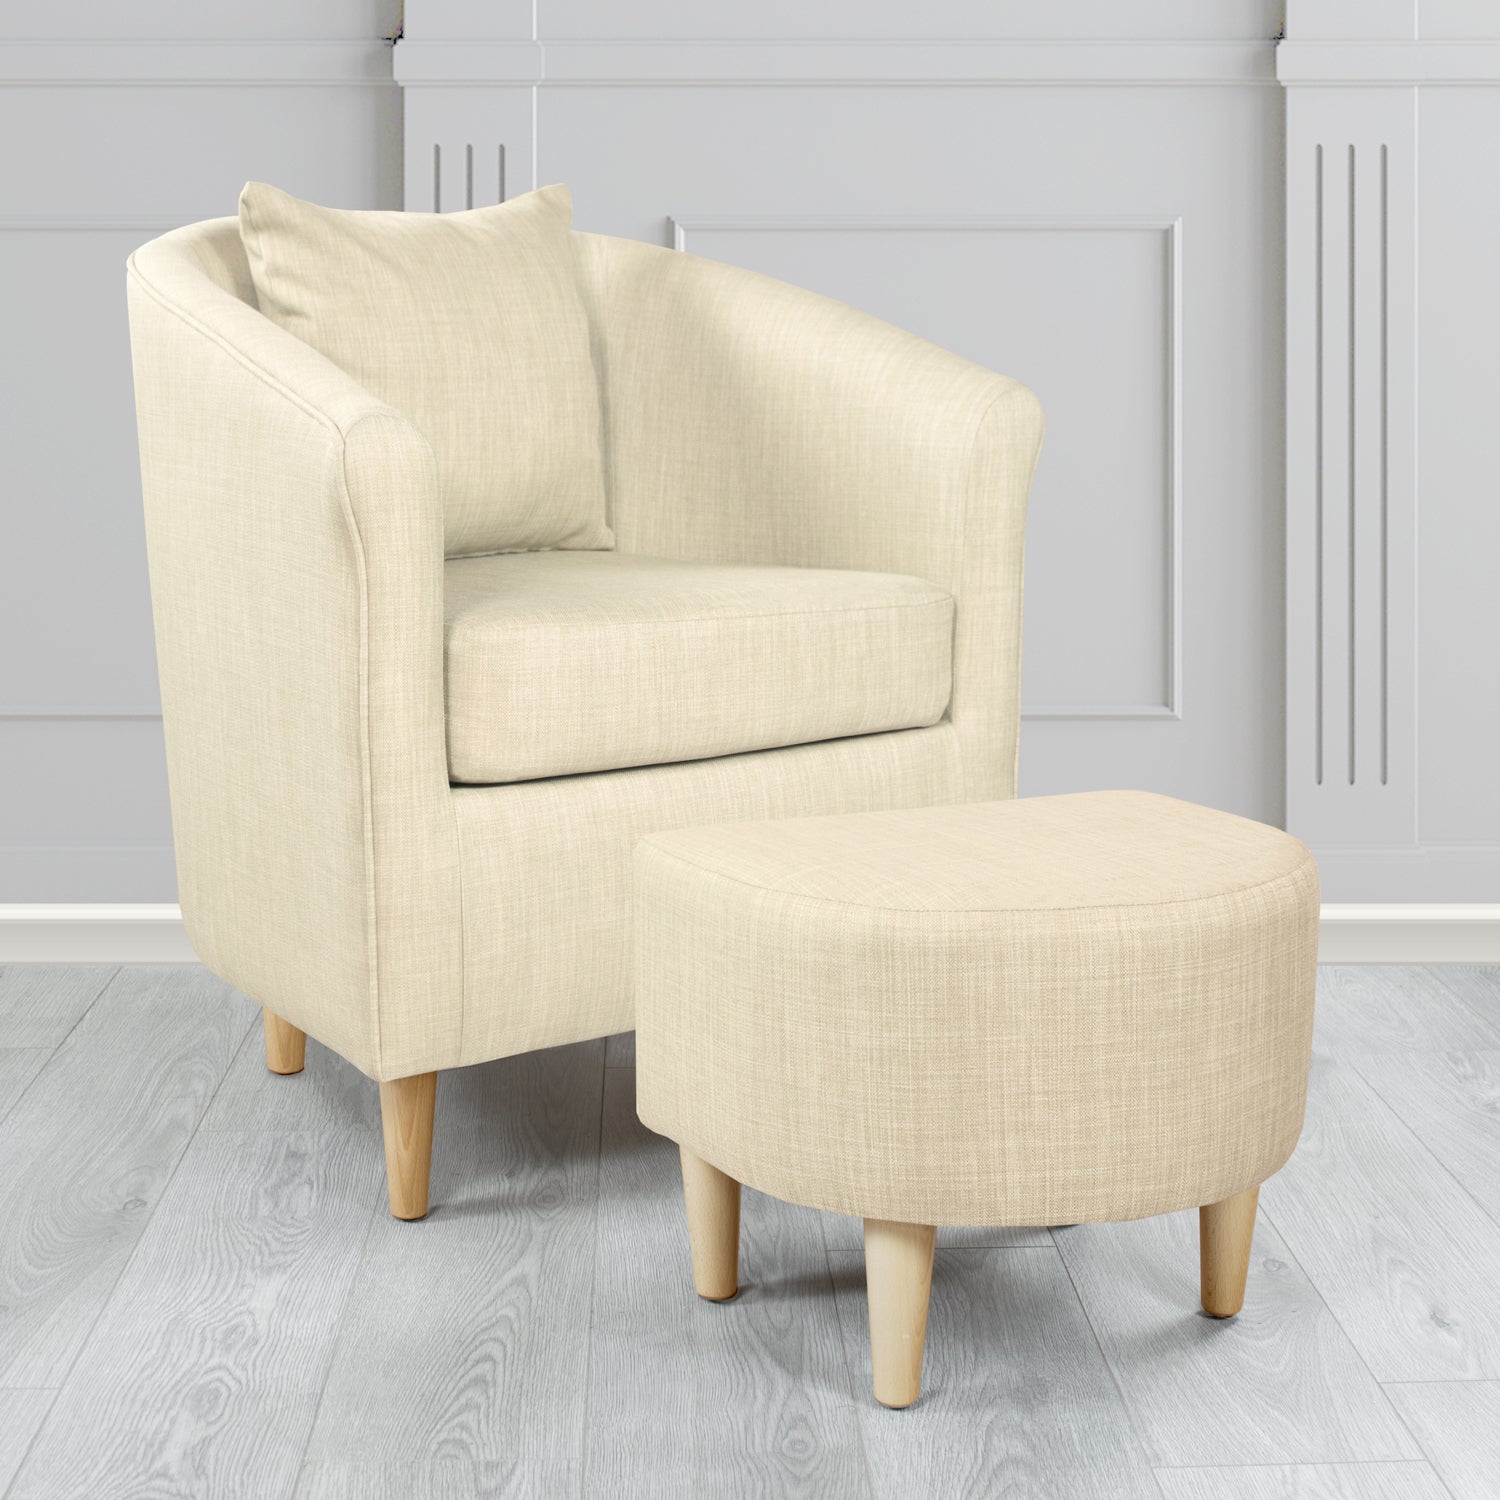 St Tropez Charles Cream Plain Linen Fabric Tub Chair & Footstool Set with Scatter Cushion - The Tub Chair Shop